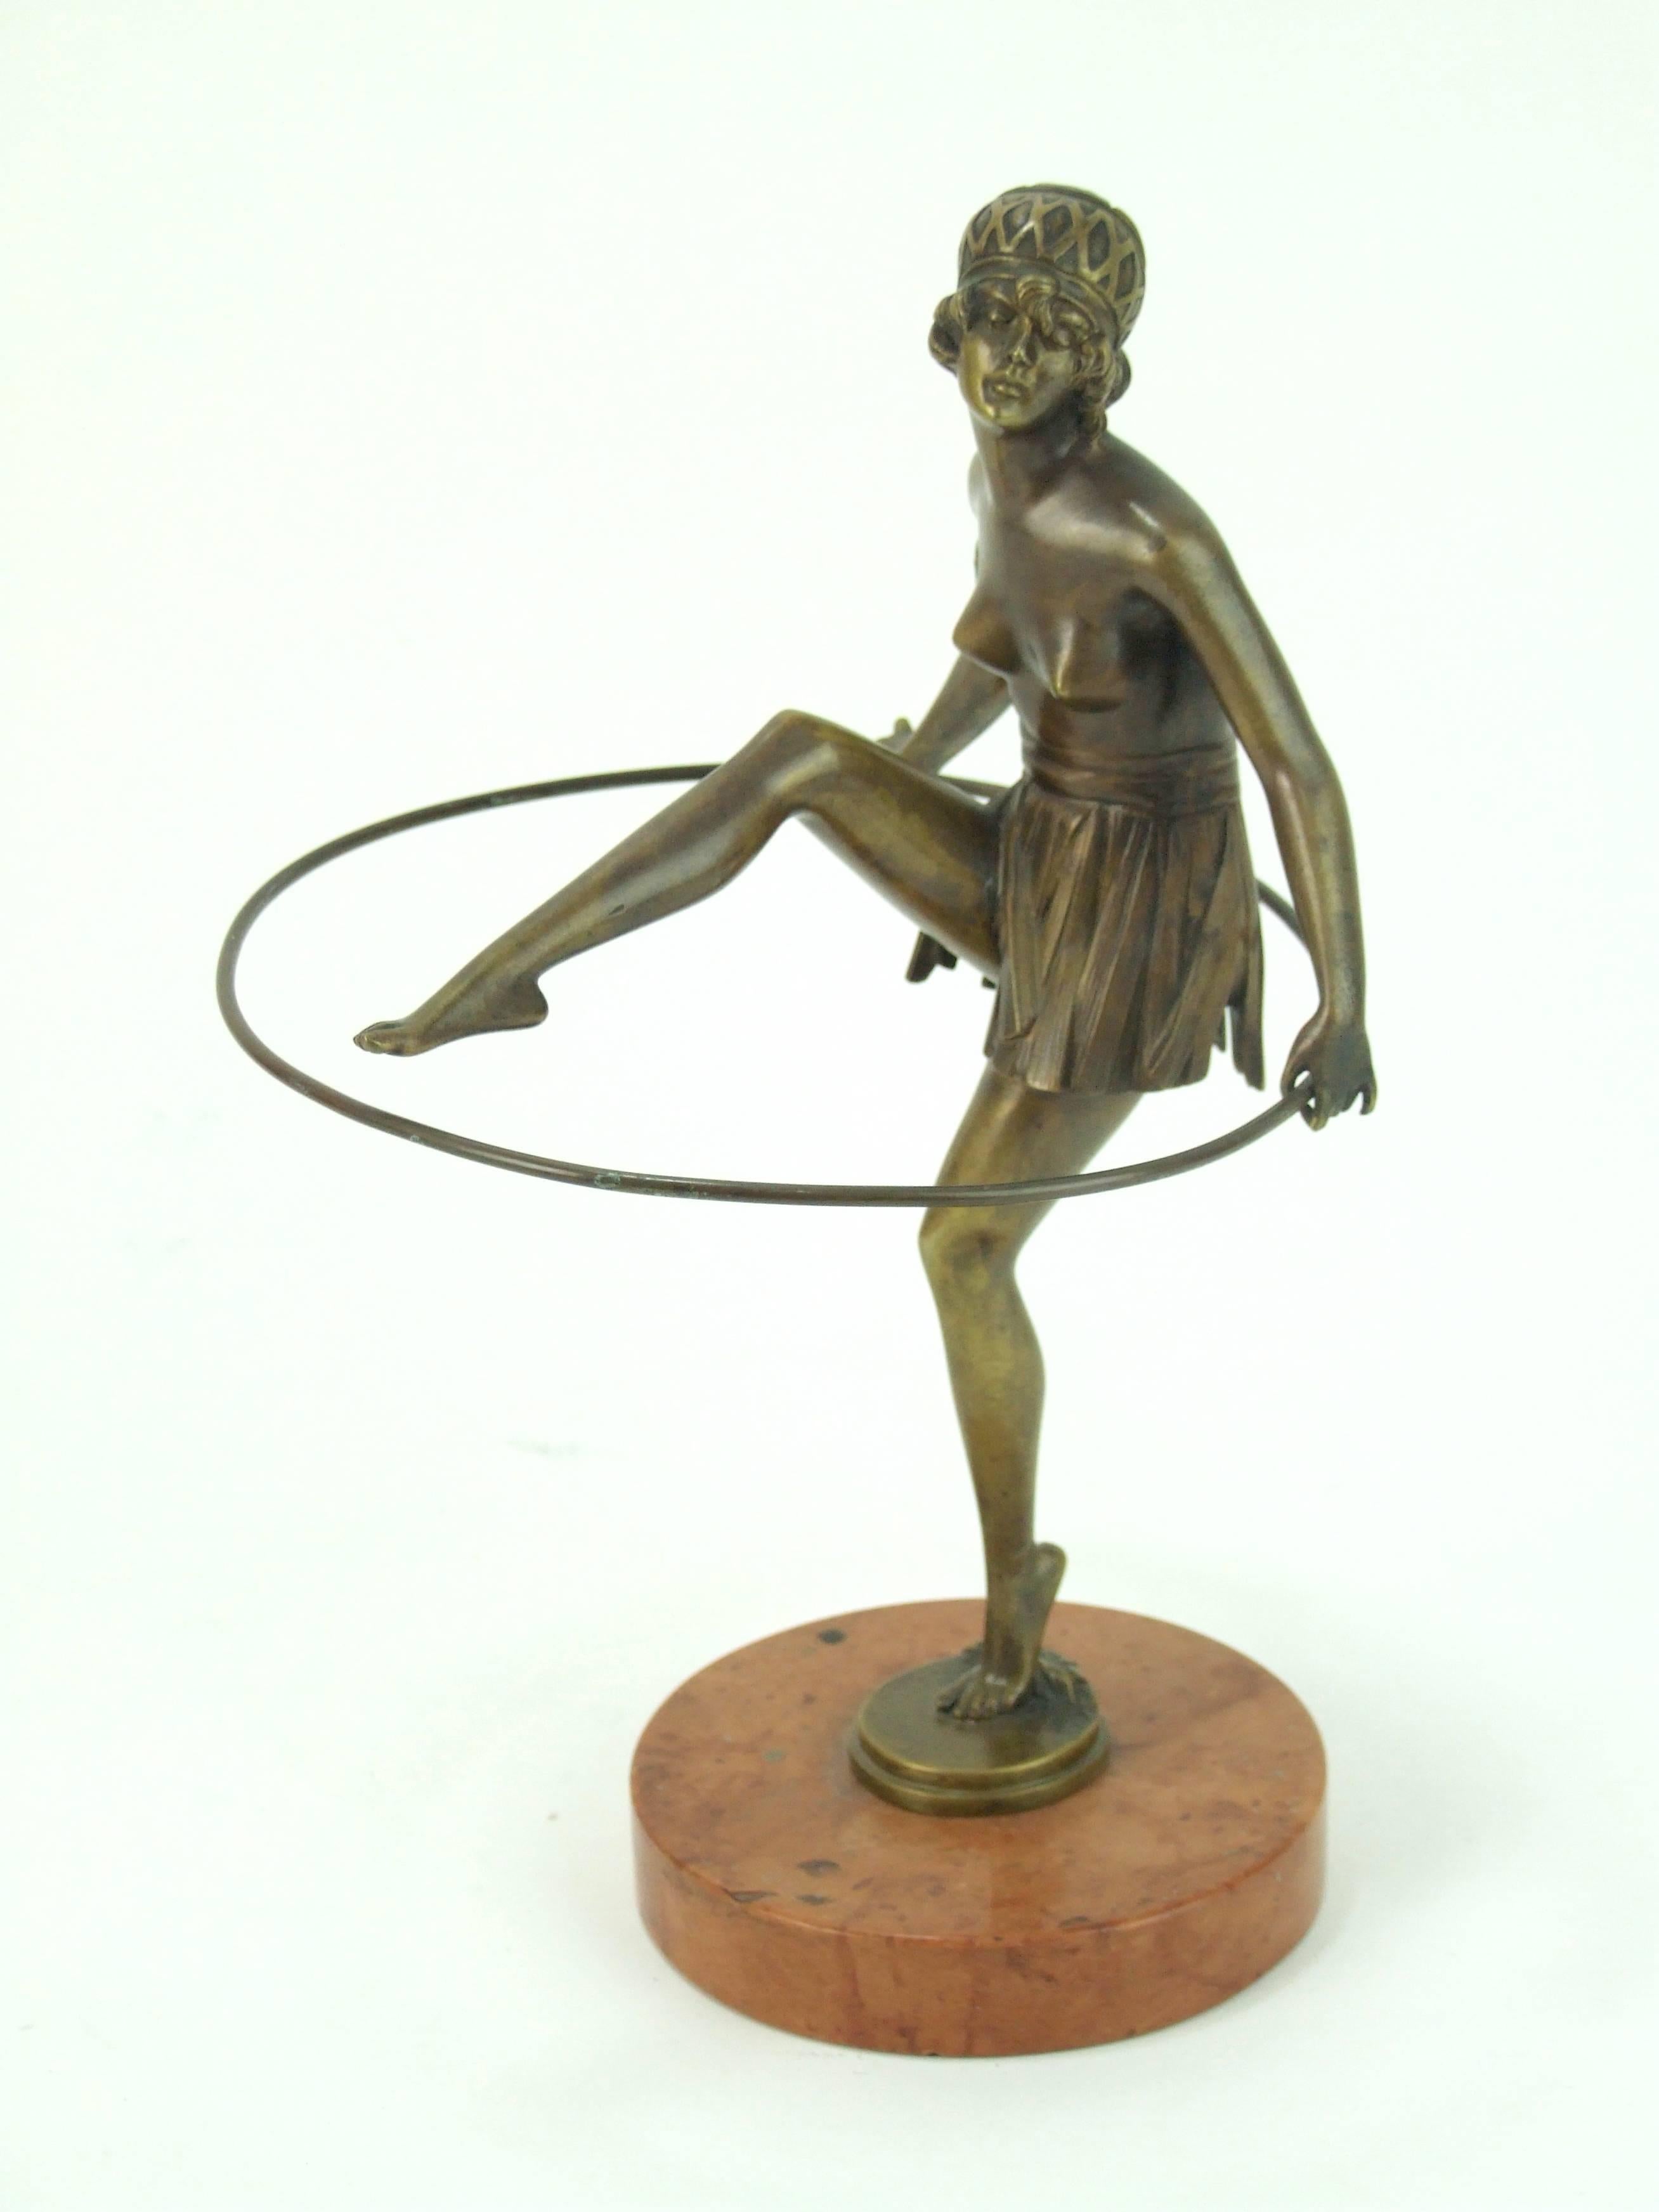 Art Deco bronze dancer by Bruno Zach, signed in the bronze base, circa 1925. Mounted on a circular marble base, she measures 11 inches high (28cm). Condition is vintage but very good.